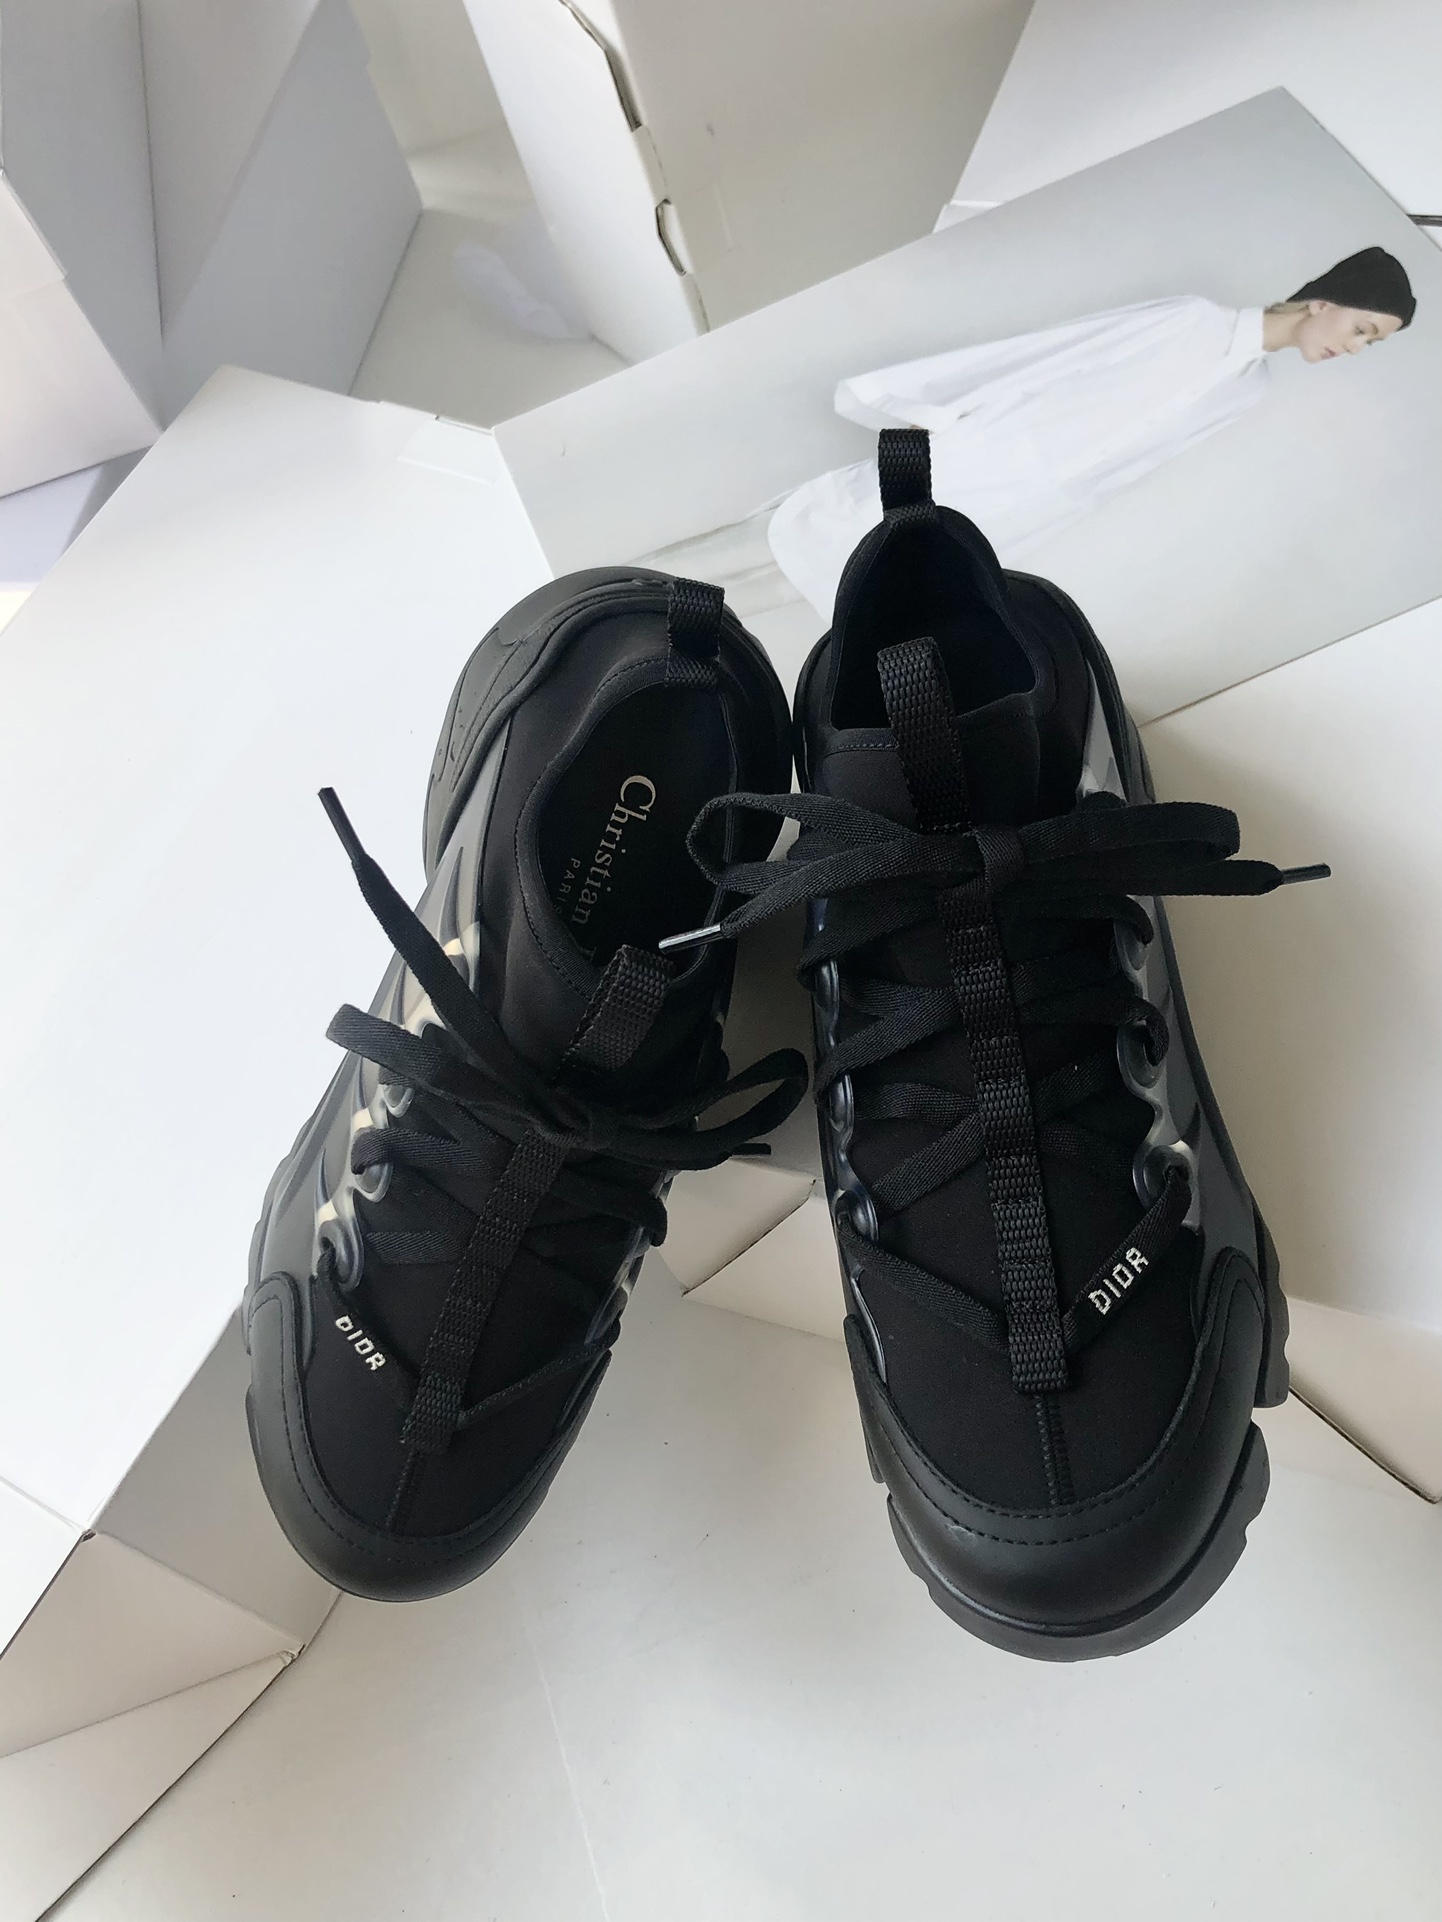 Dior Shoes Sneakers Buy Top High quality Replica
 Black Spring/Summer Collection Casual